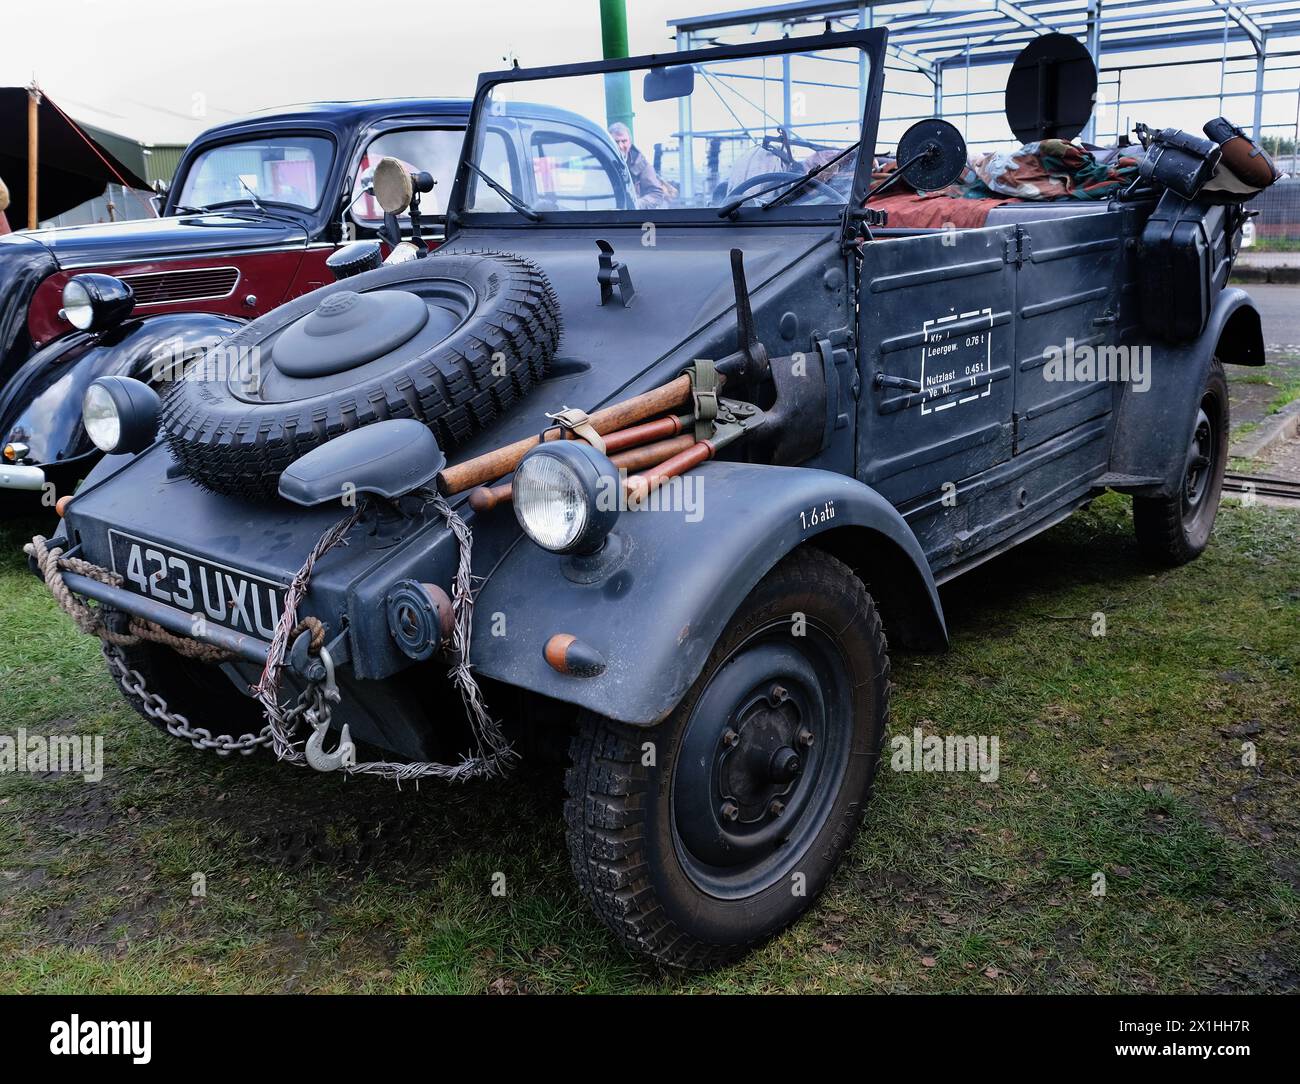 The Kübelwagen's role as a light multi-purpose military vehicle made it the German equivalent to the Allied Willys MB 'jeep' and the GAZ-67 Stock Photo